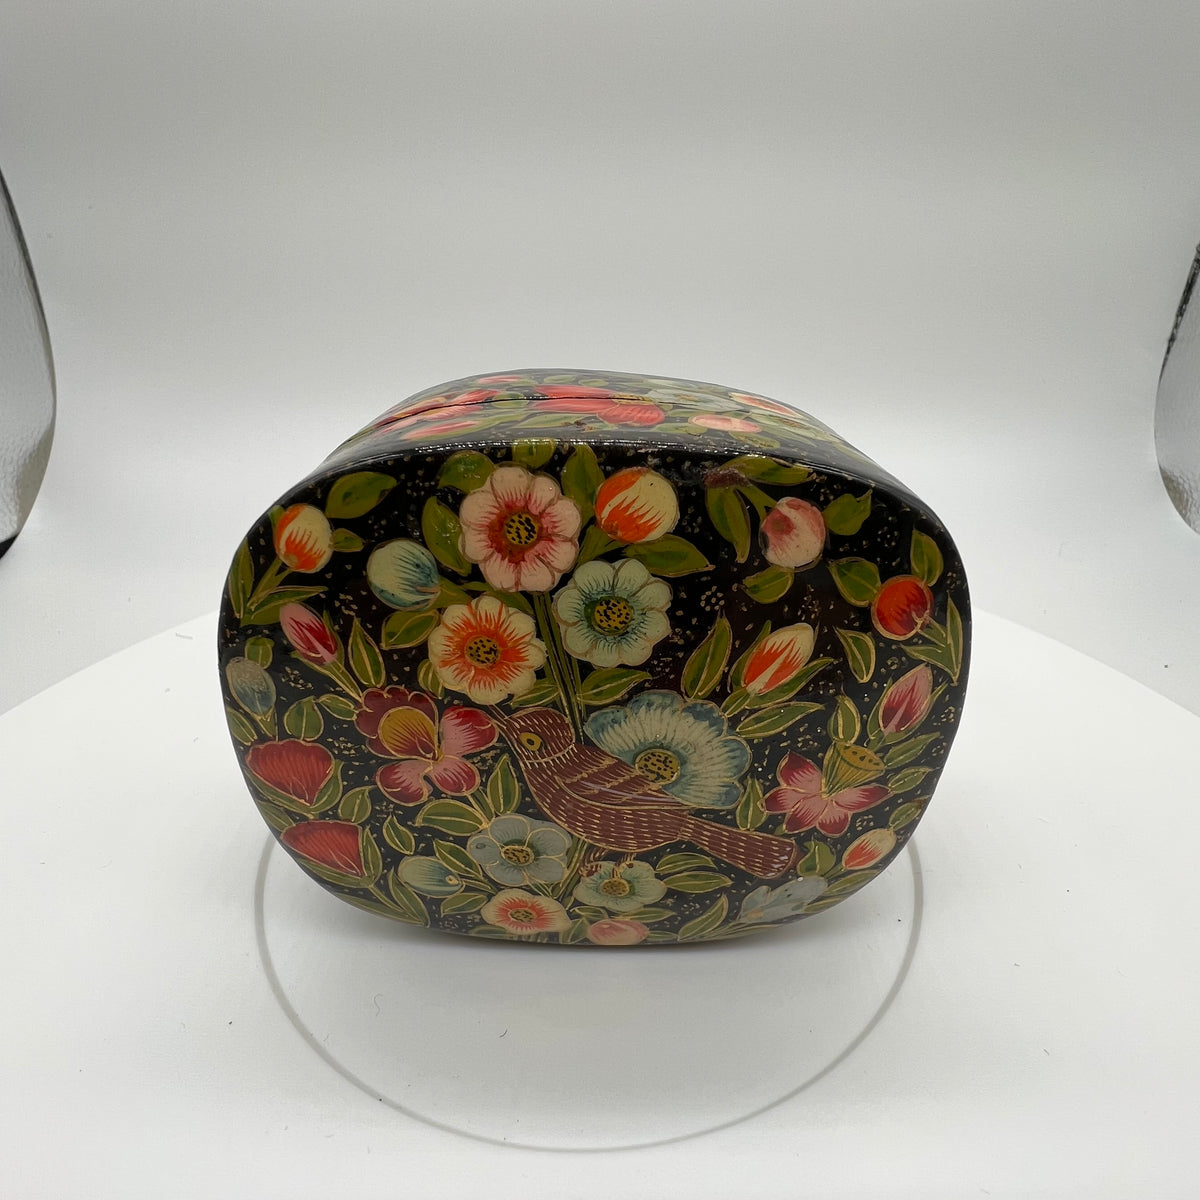 Lovely and finely detailed hand-painted Kashmiri paper cache trinket box. Features flowers, leaves and a bird on a black background.All sides and top of box are painted. 